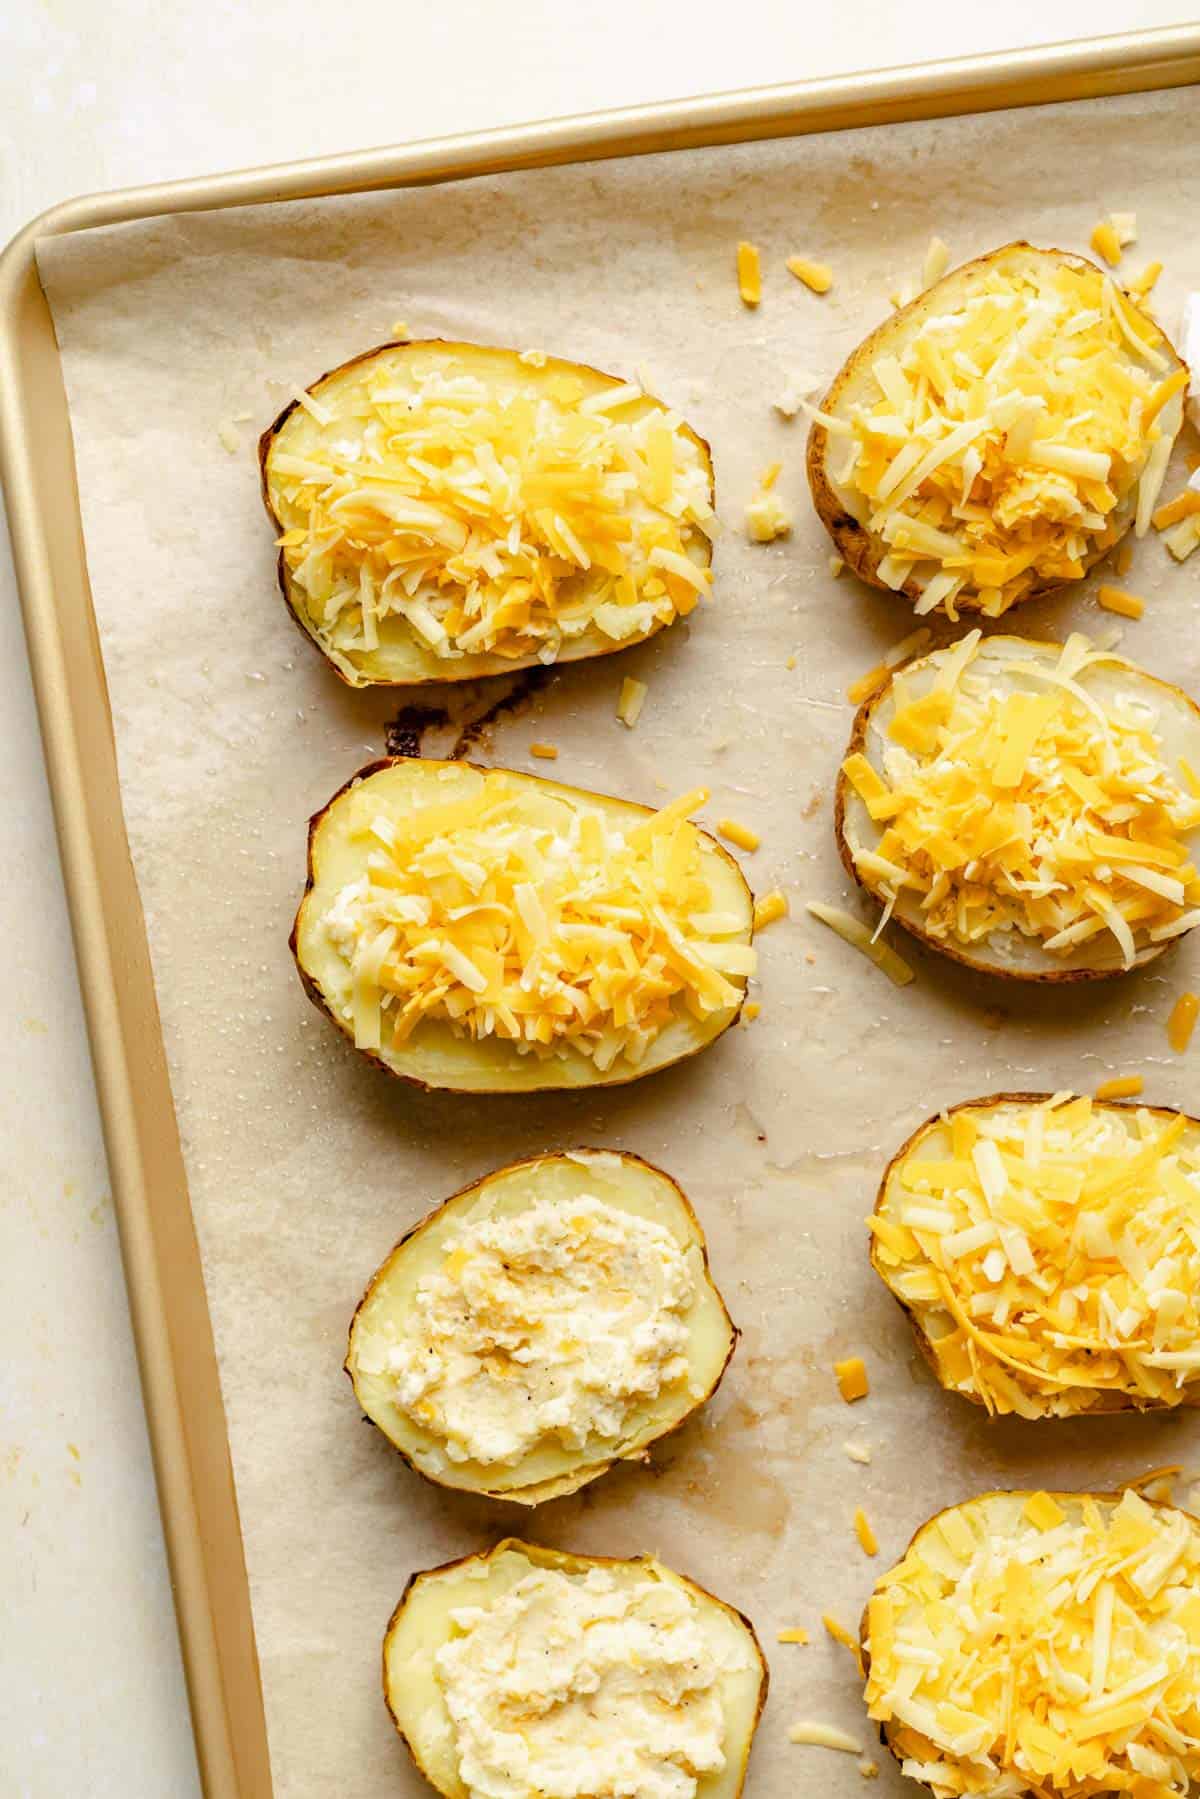 cheese is placed on top of potatoes